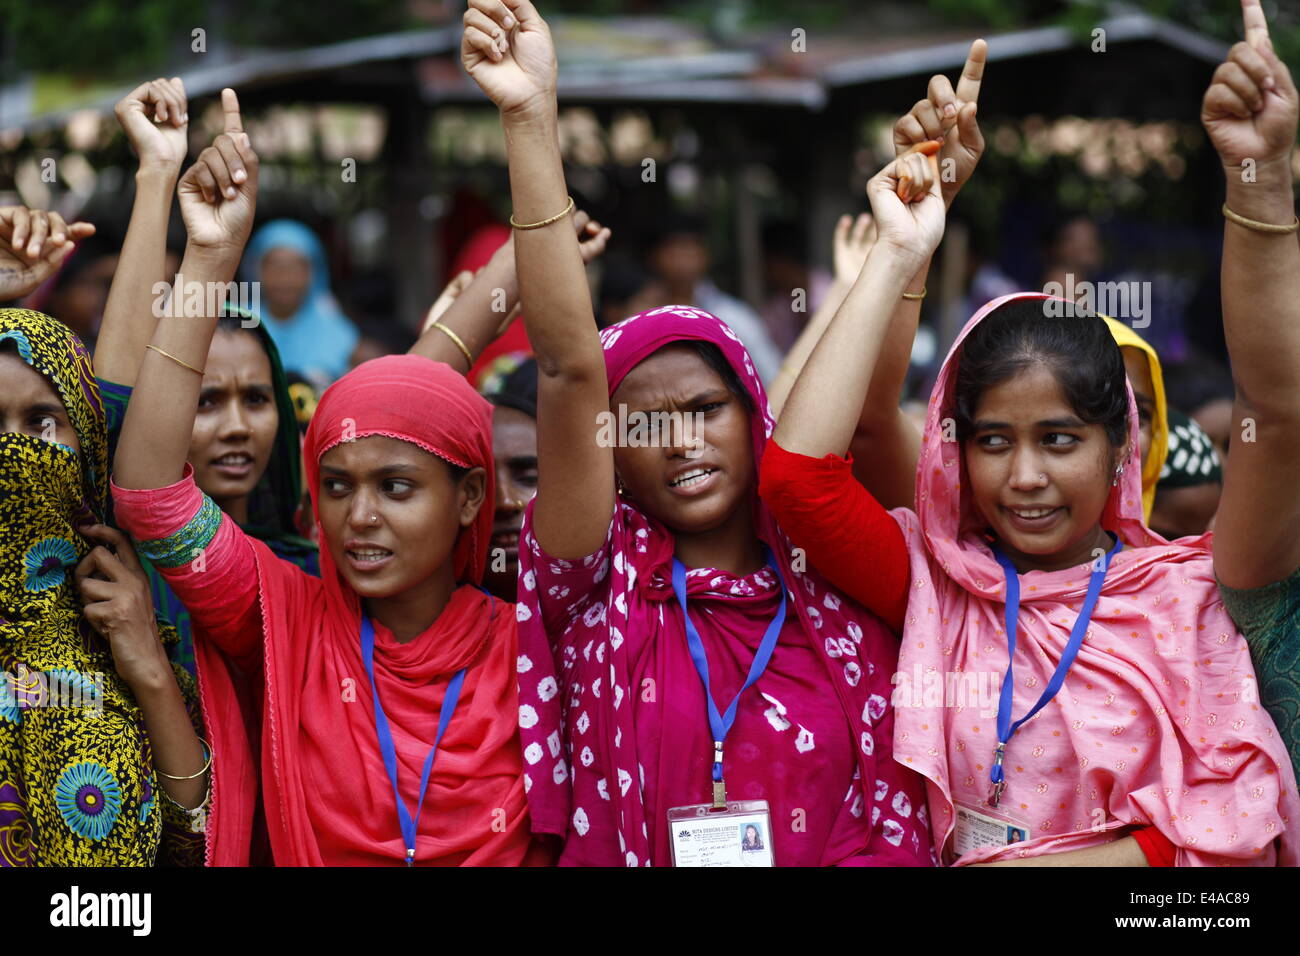 Dhaka, Bangladesh. 7th July, 2014. Bangladeshi garment workers shout slogans during a demonstration in Dhaka. The workers were demanding salary increases and a festival bonus ahead of the Islamic holiday festival Eid-al-Fitr which marks the end of the holy month of Ramadan Credit:  zakir hossain chowdhury zakir/Alamy Live News Stock Photo